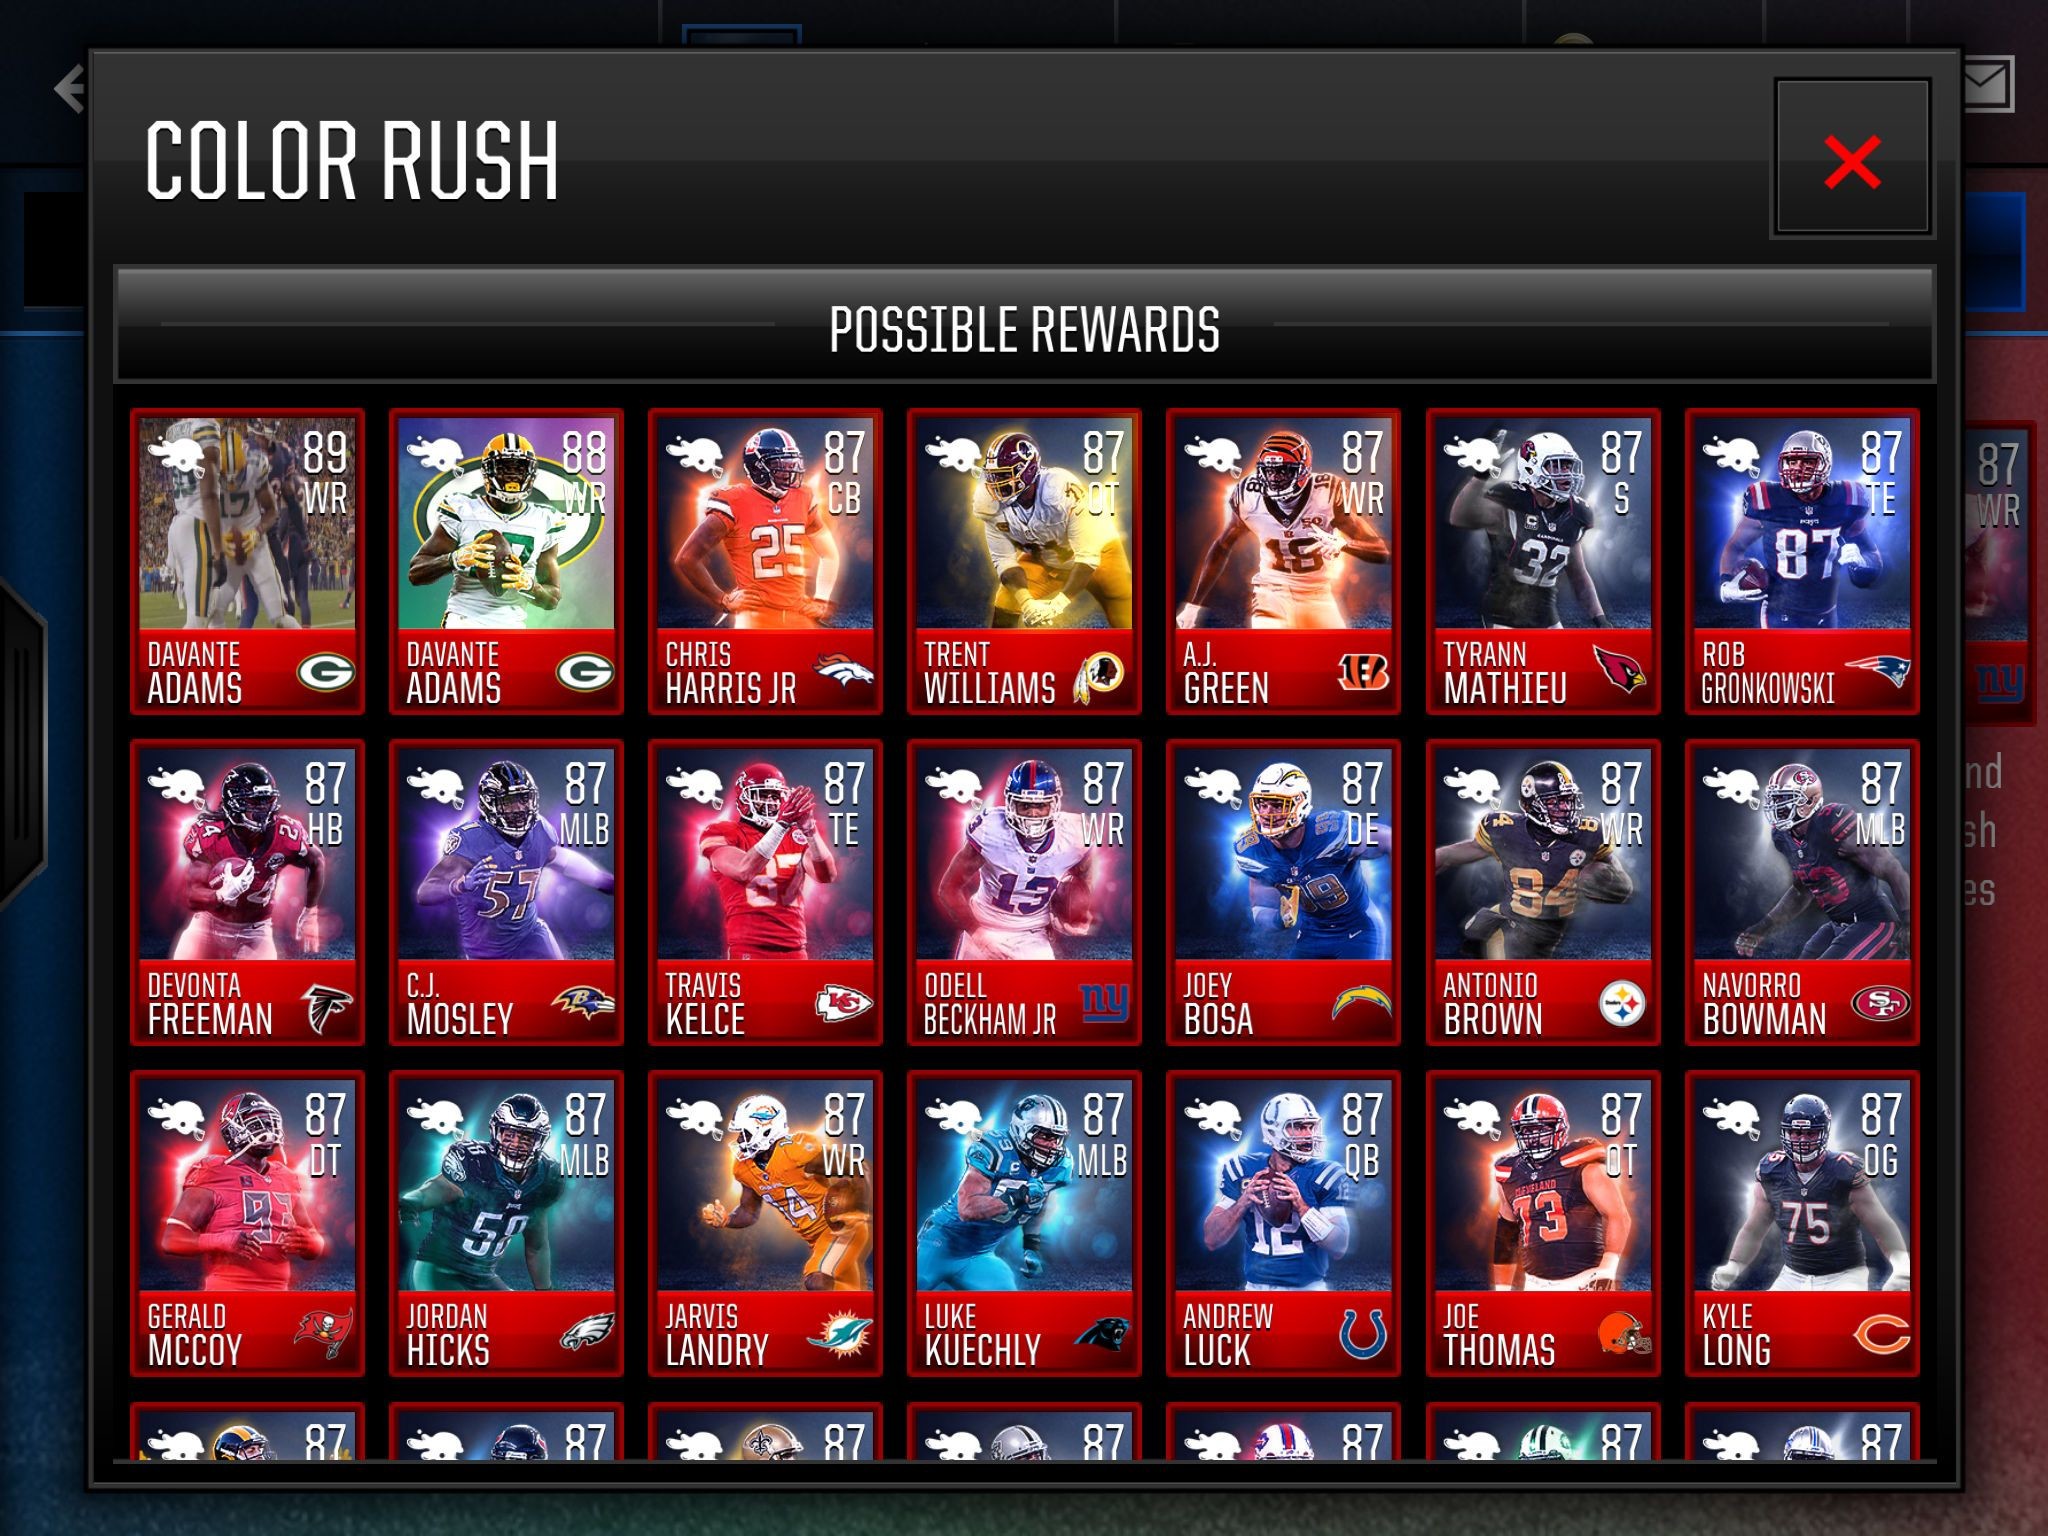 2048x1536 How to Get Regular Elite Color Rush Players